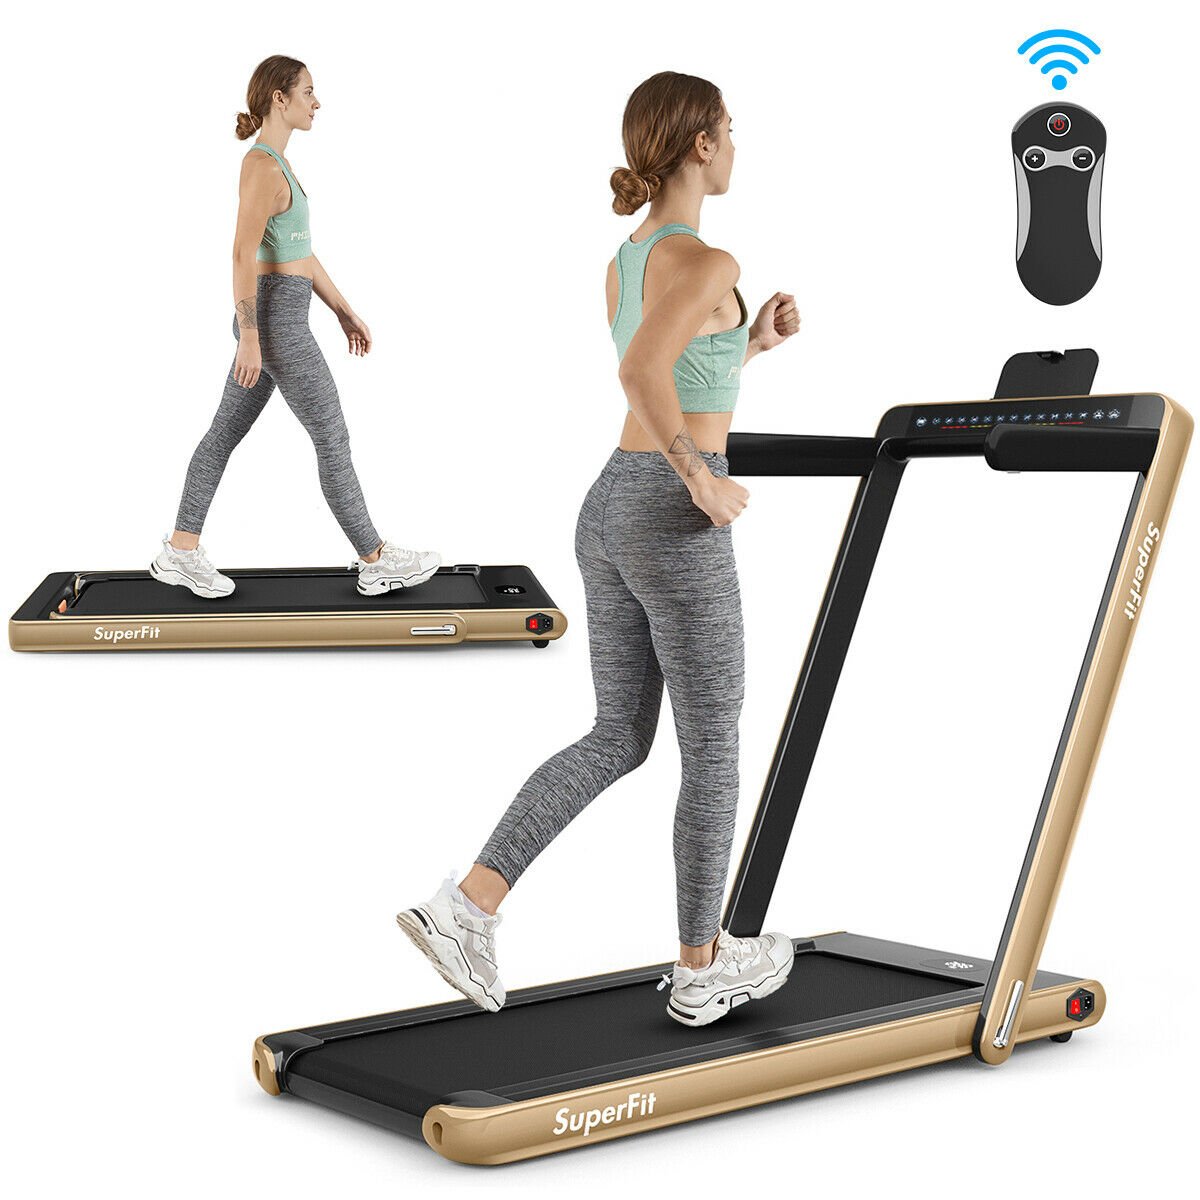 2-in-1 Electric Motorized Health and Fitness Folding Treadmill with Dual Display and Bluetooth Speaker-CASAINC